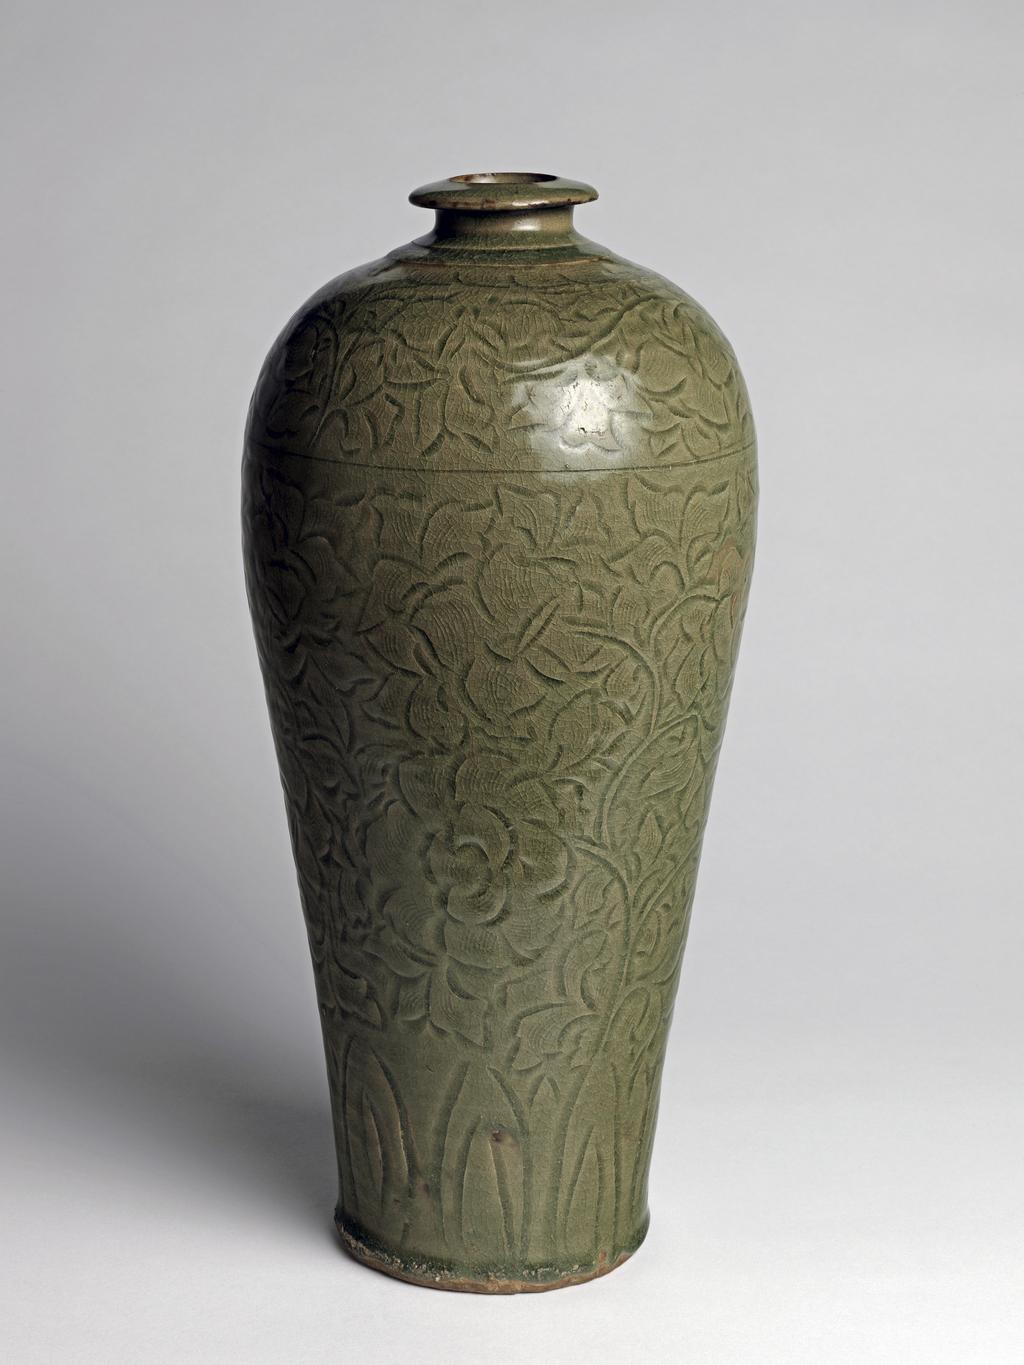 An image of Tall stoneware vase. Northern Celadon type with a brownish green, finely crackled glaze. The body is grey with incised and combed decoration of stiff leaves round base below peonies and foliage.  There is a leaf scroll band round the shoulder, as well as a brown mark. The lip is everted and downward sloping. The base is recessed and glazed, with kiln sand attached. The rim is unglazed. Stoneware, celadon glazed, incised, height 42.5 cm, diameter 19 cm. Song Dynasty (960-1279). Chinese.